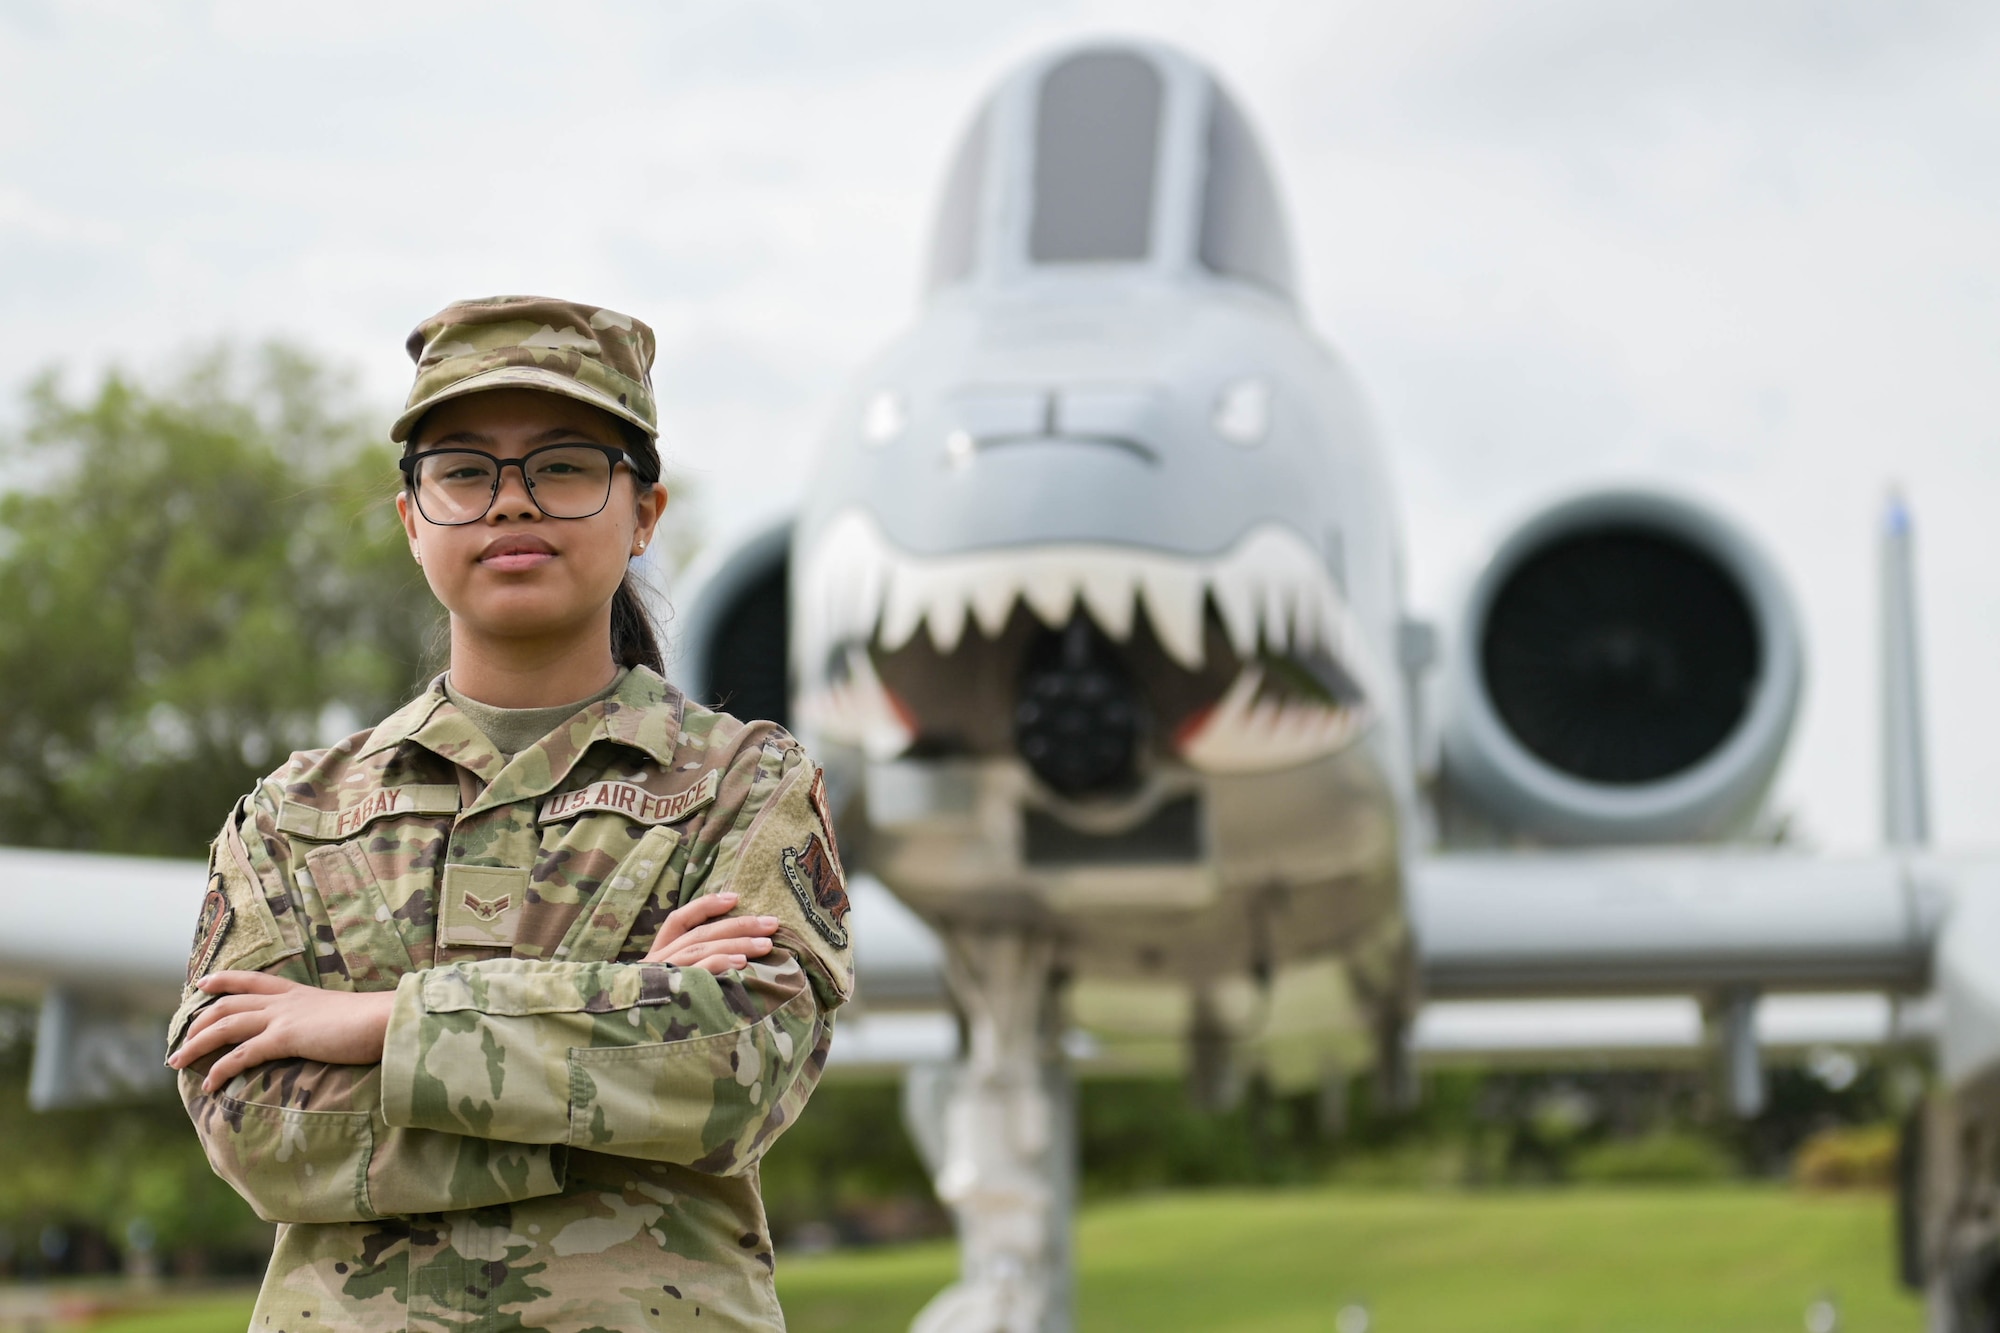 U.S. Air Force Airman 1st Class Jan Beatrice Fabay, 23rd Force Support Squadron career development assignments technician, poses in front of an A-10C Thunderbolt II aircraft, April 5, 2022, at Moody Air Force Base, Georgia. The assignments section has to carefully vet all assignments and provide correct information to affected Airmen. (U.S. Air Force photo by Senior Airman Rebeckah Medeiros)